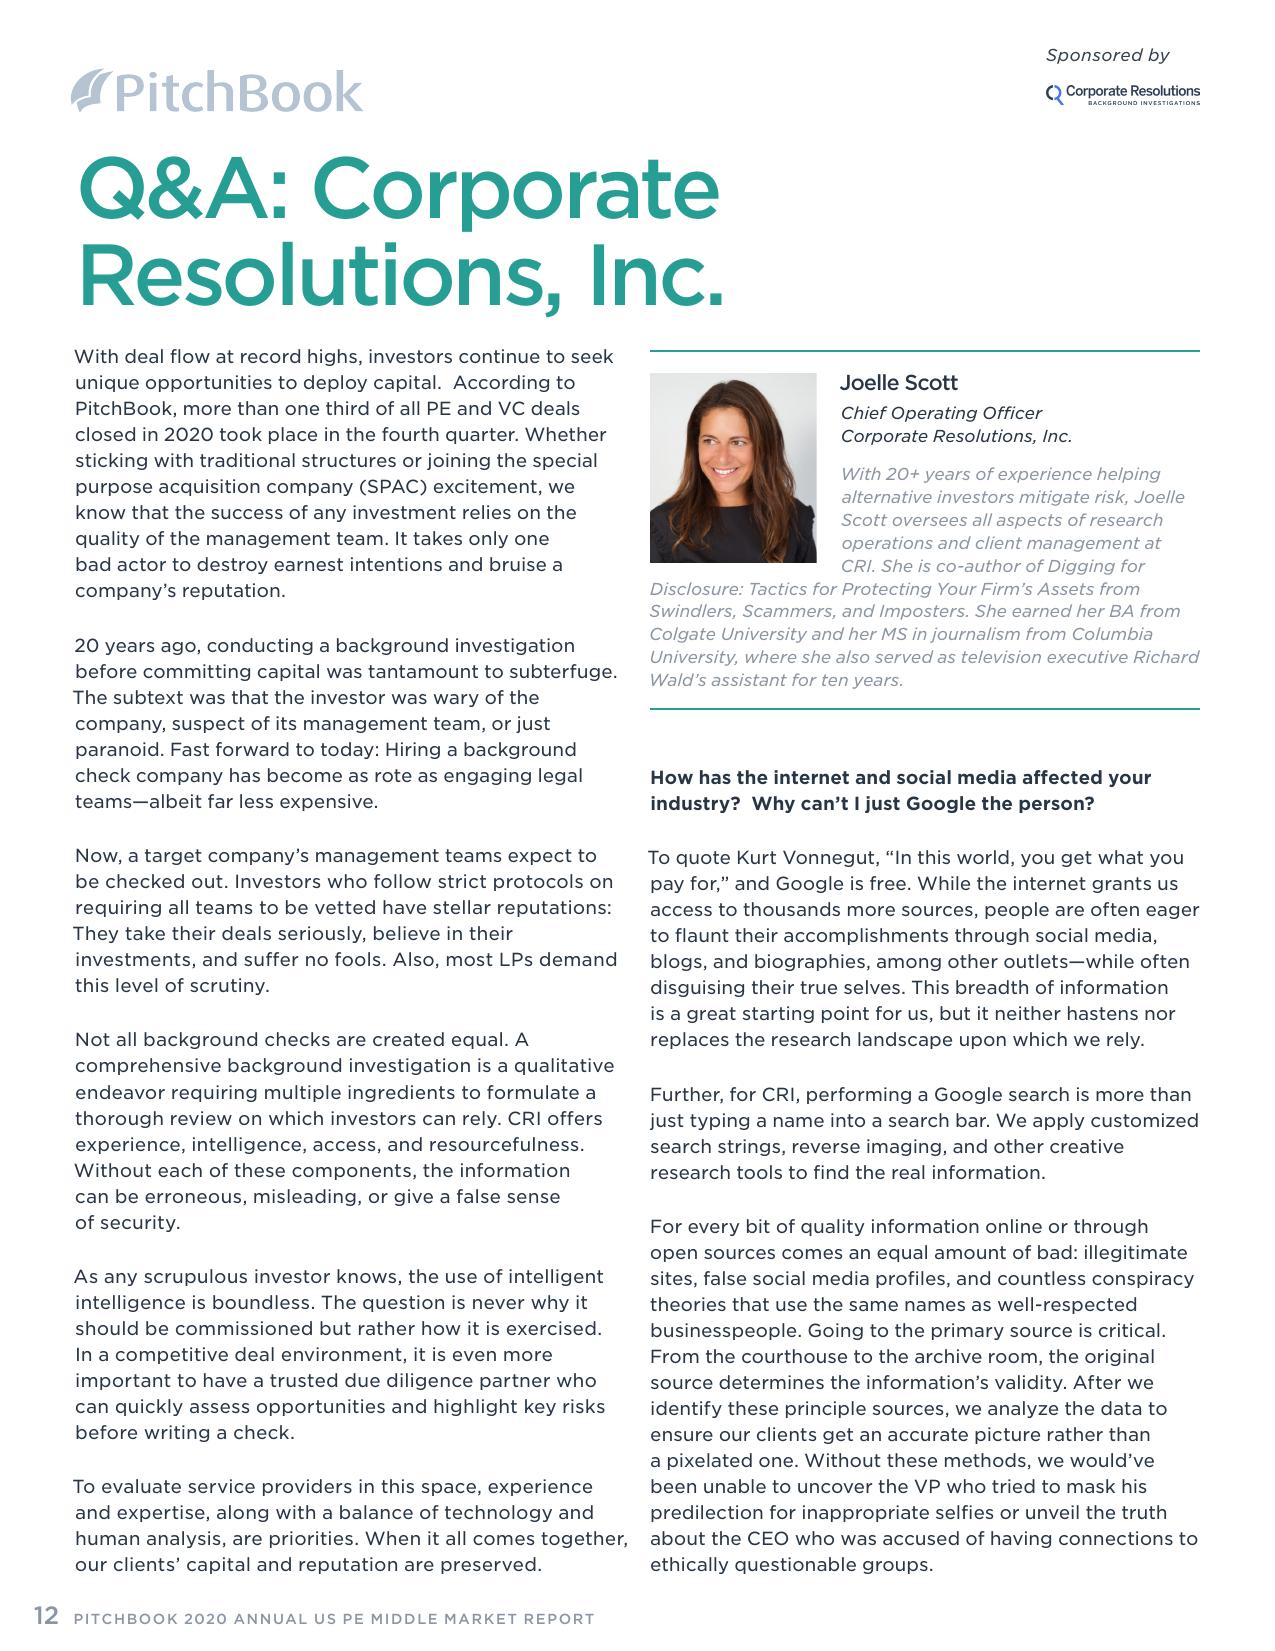 CORPORATERESOLUTIONS 2021 Annual Report